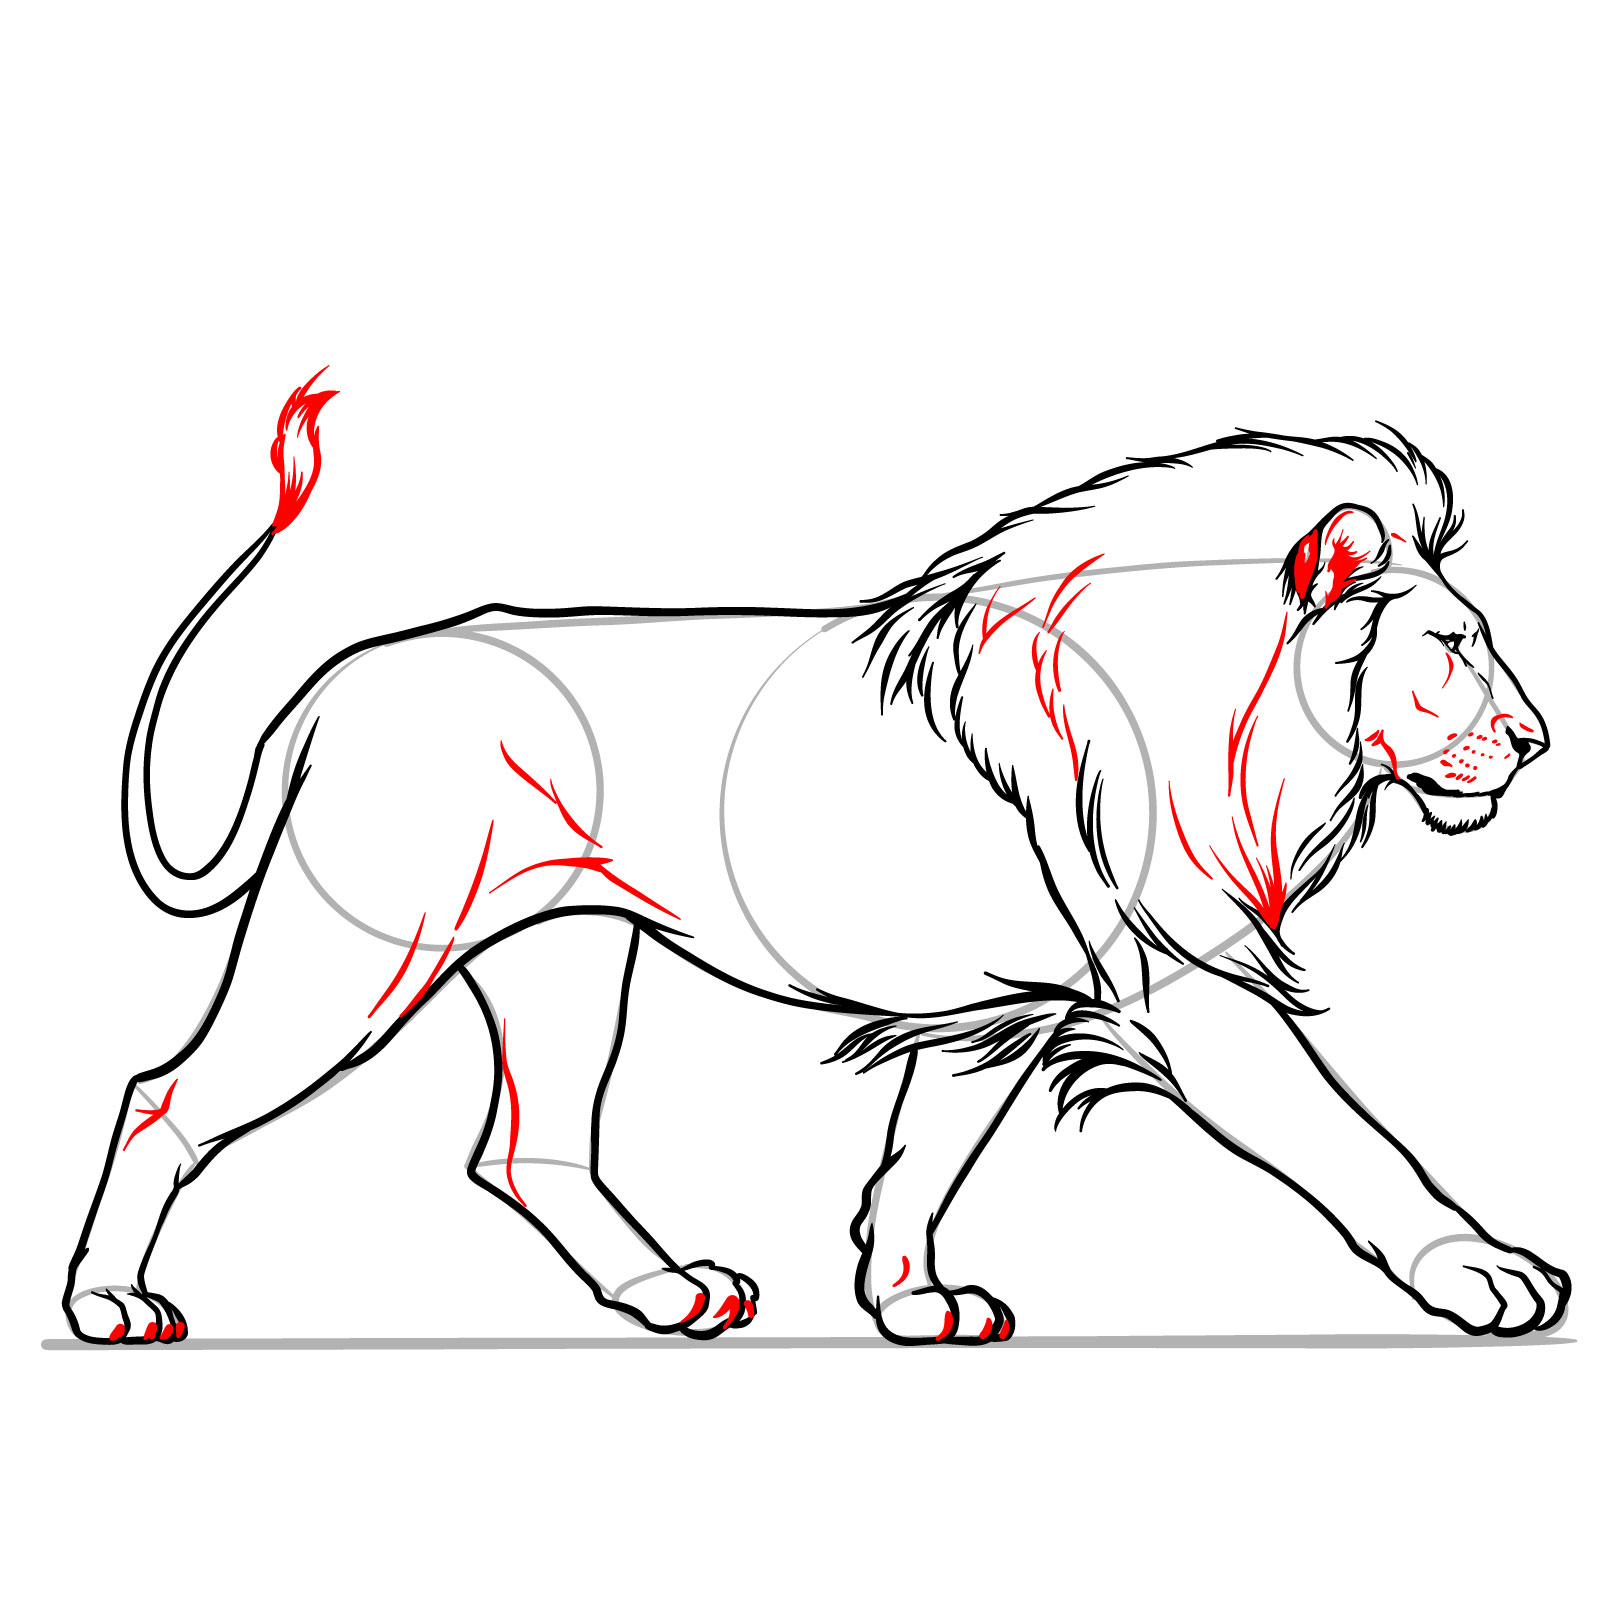 Detailed instruction for adding final touches to a walking lion drawing - step 11